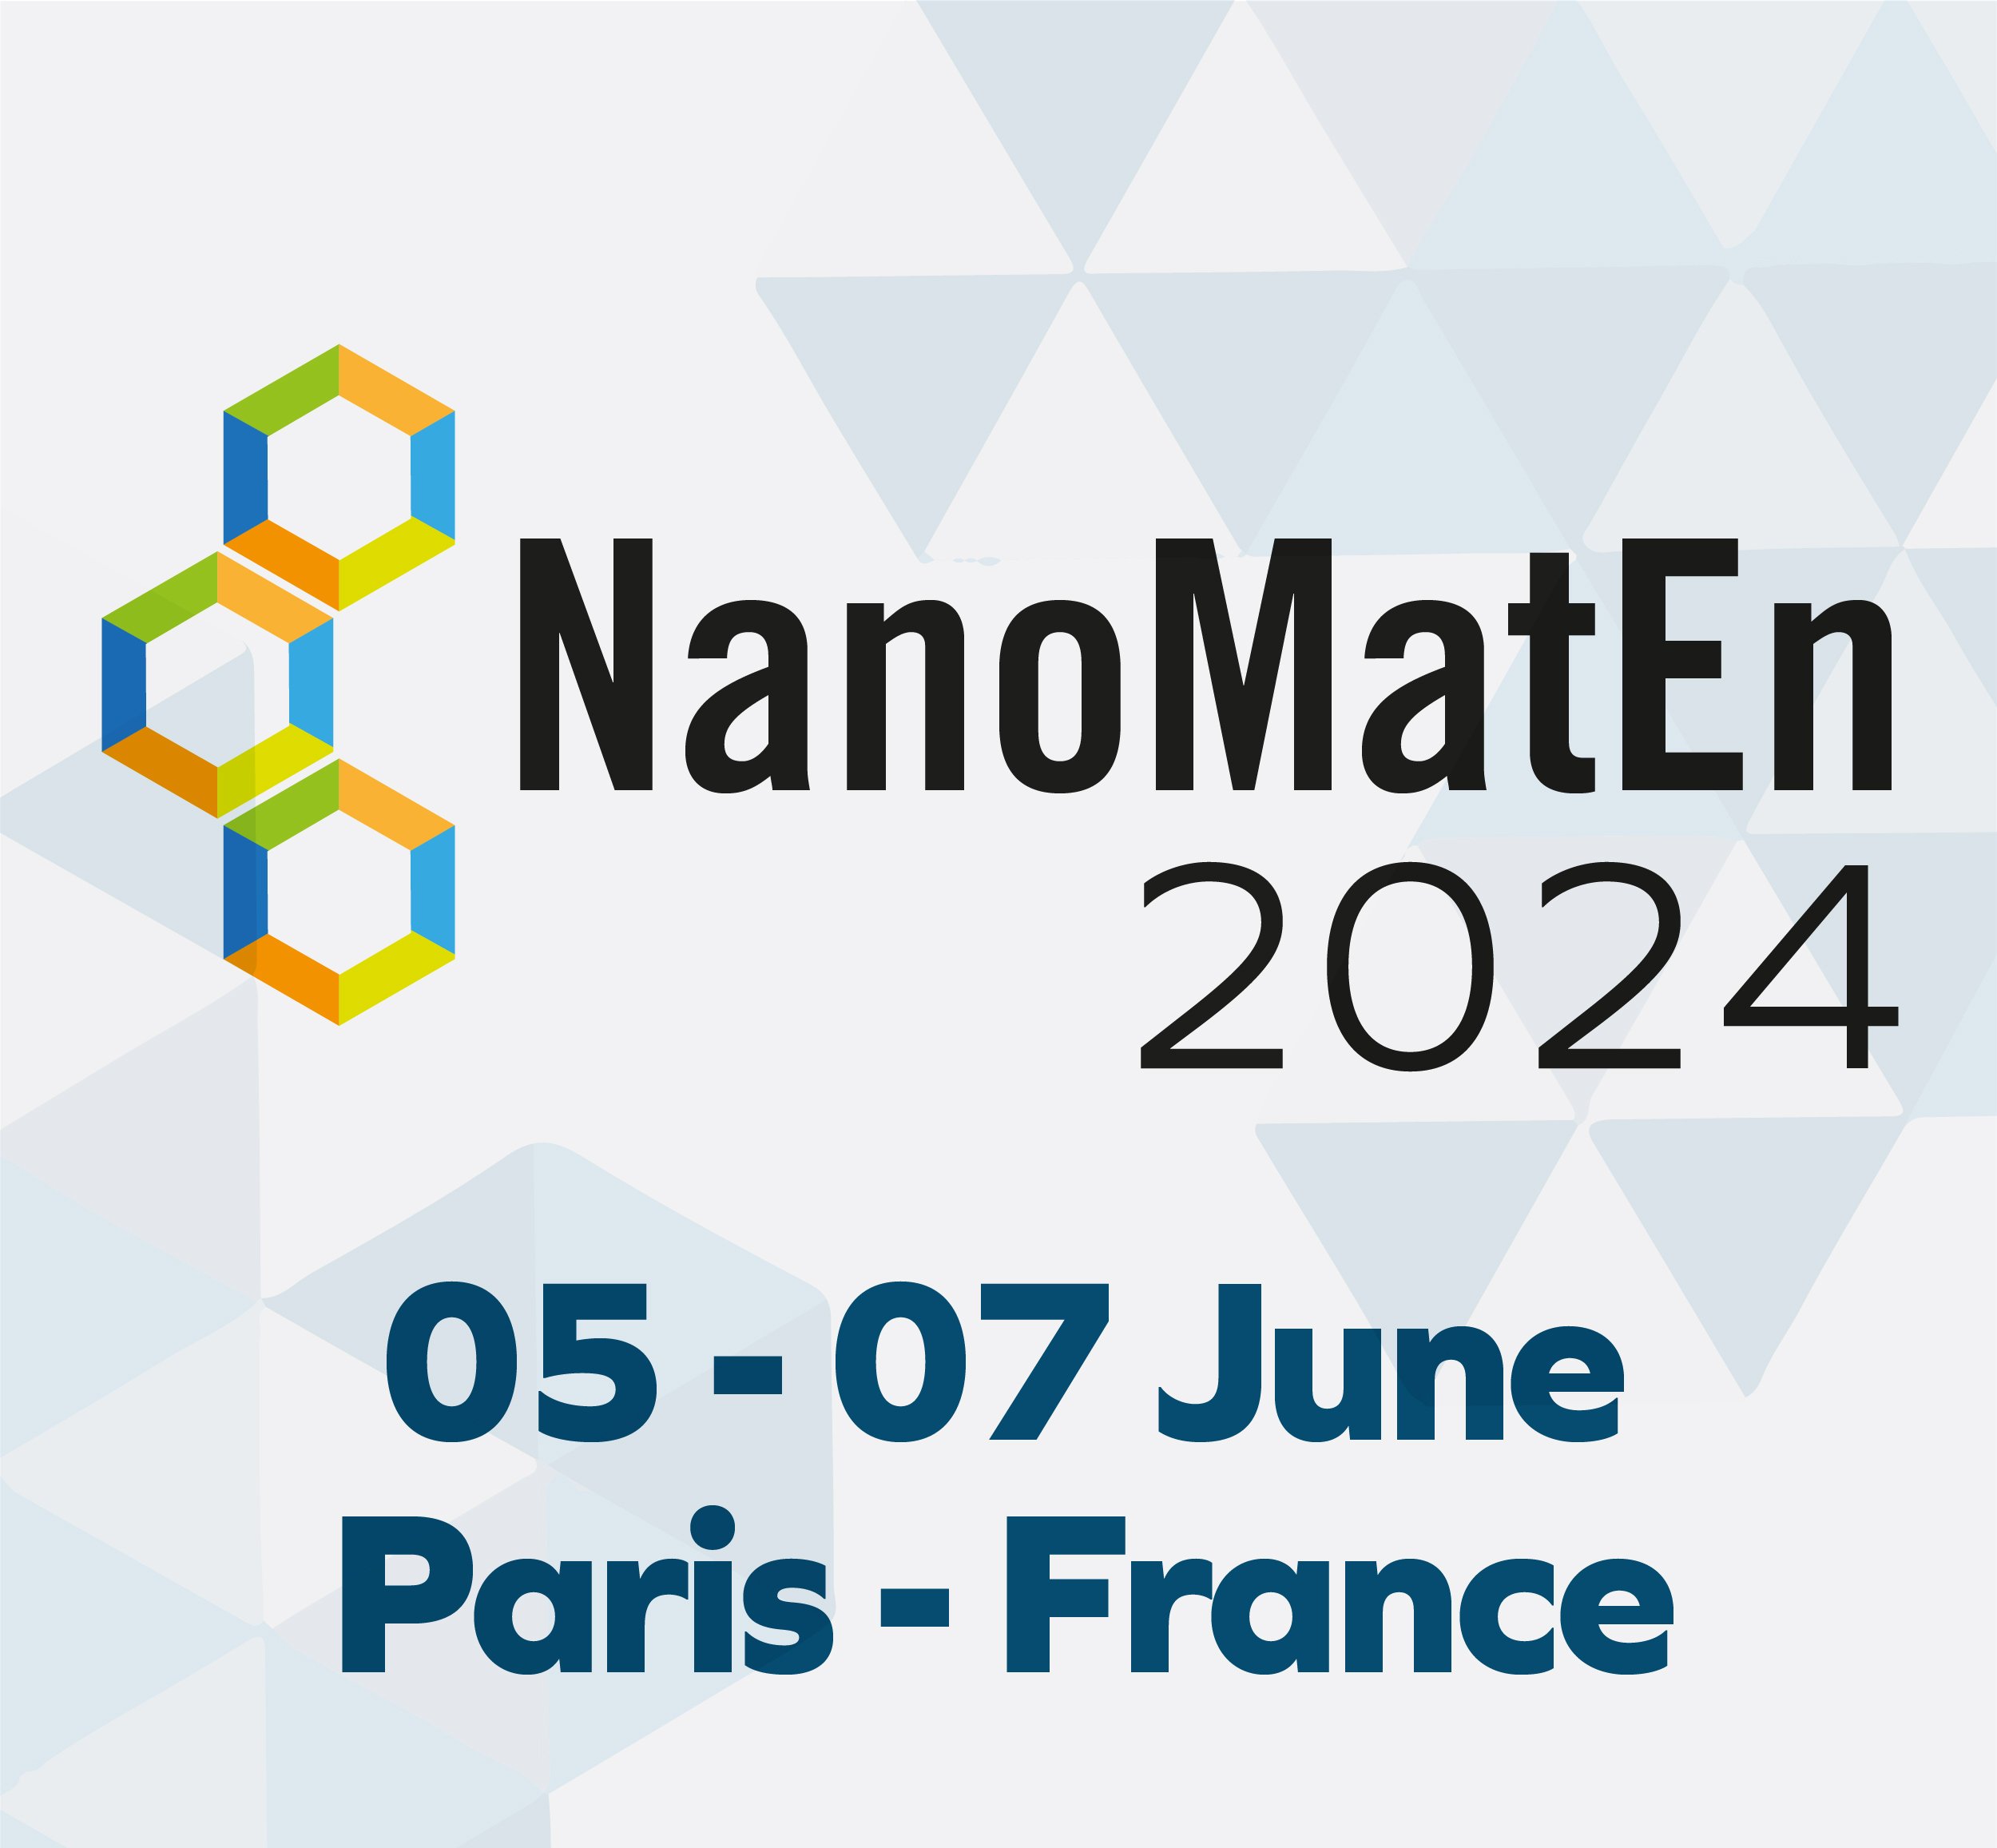 The 9th Ed. of the International conference on NanoMaterials for Energy & Environment - NanoMatEn 2024, 05 - 07 June 2024, Paris, France